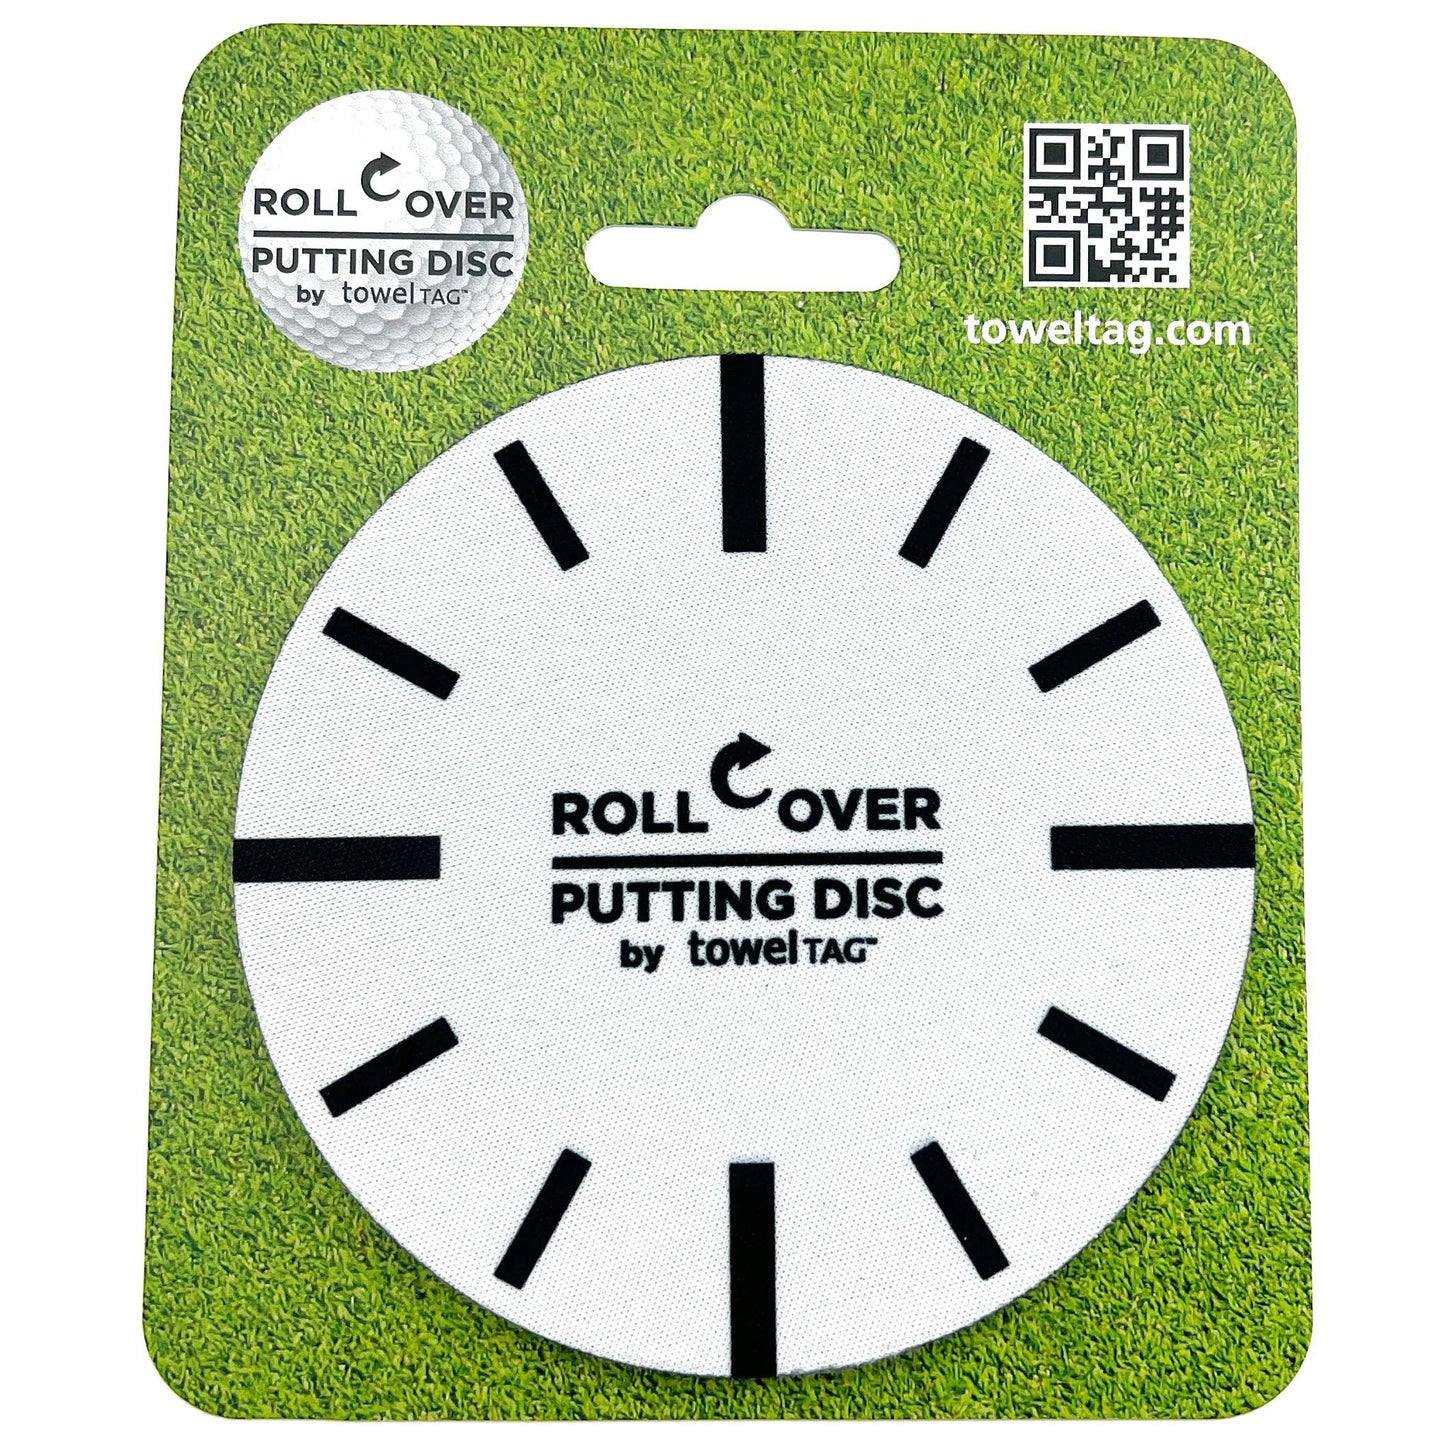 Roll Over Putting Disc